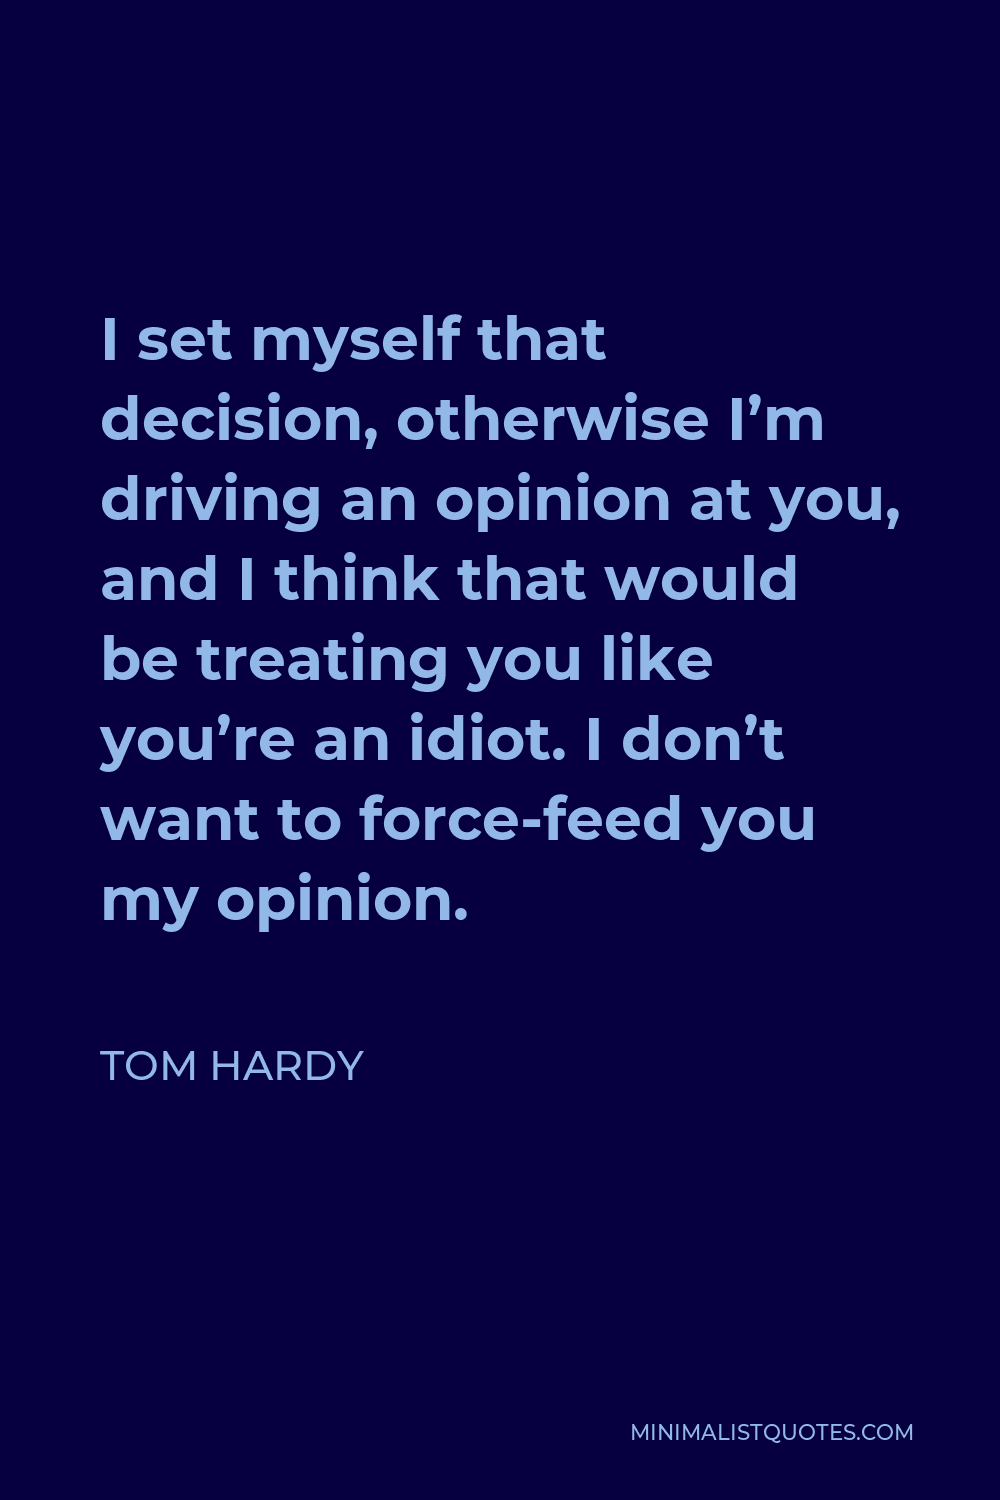 Tom Hardy Quote - I set myself that decision, otherwise I’m driving an opinion at you, and I think that would be treating you like you’re an idiot. I don’t want to force-feed you my opinion.